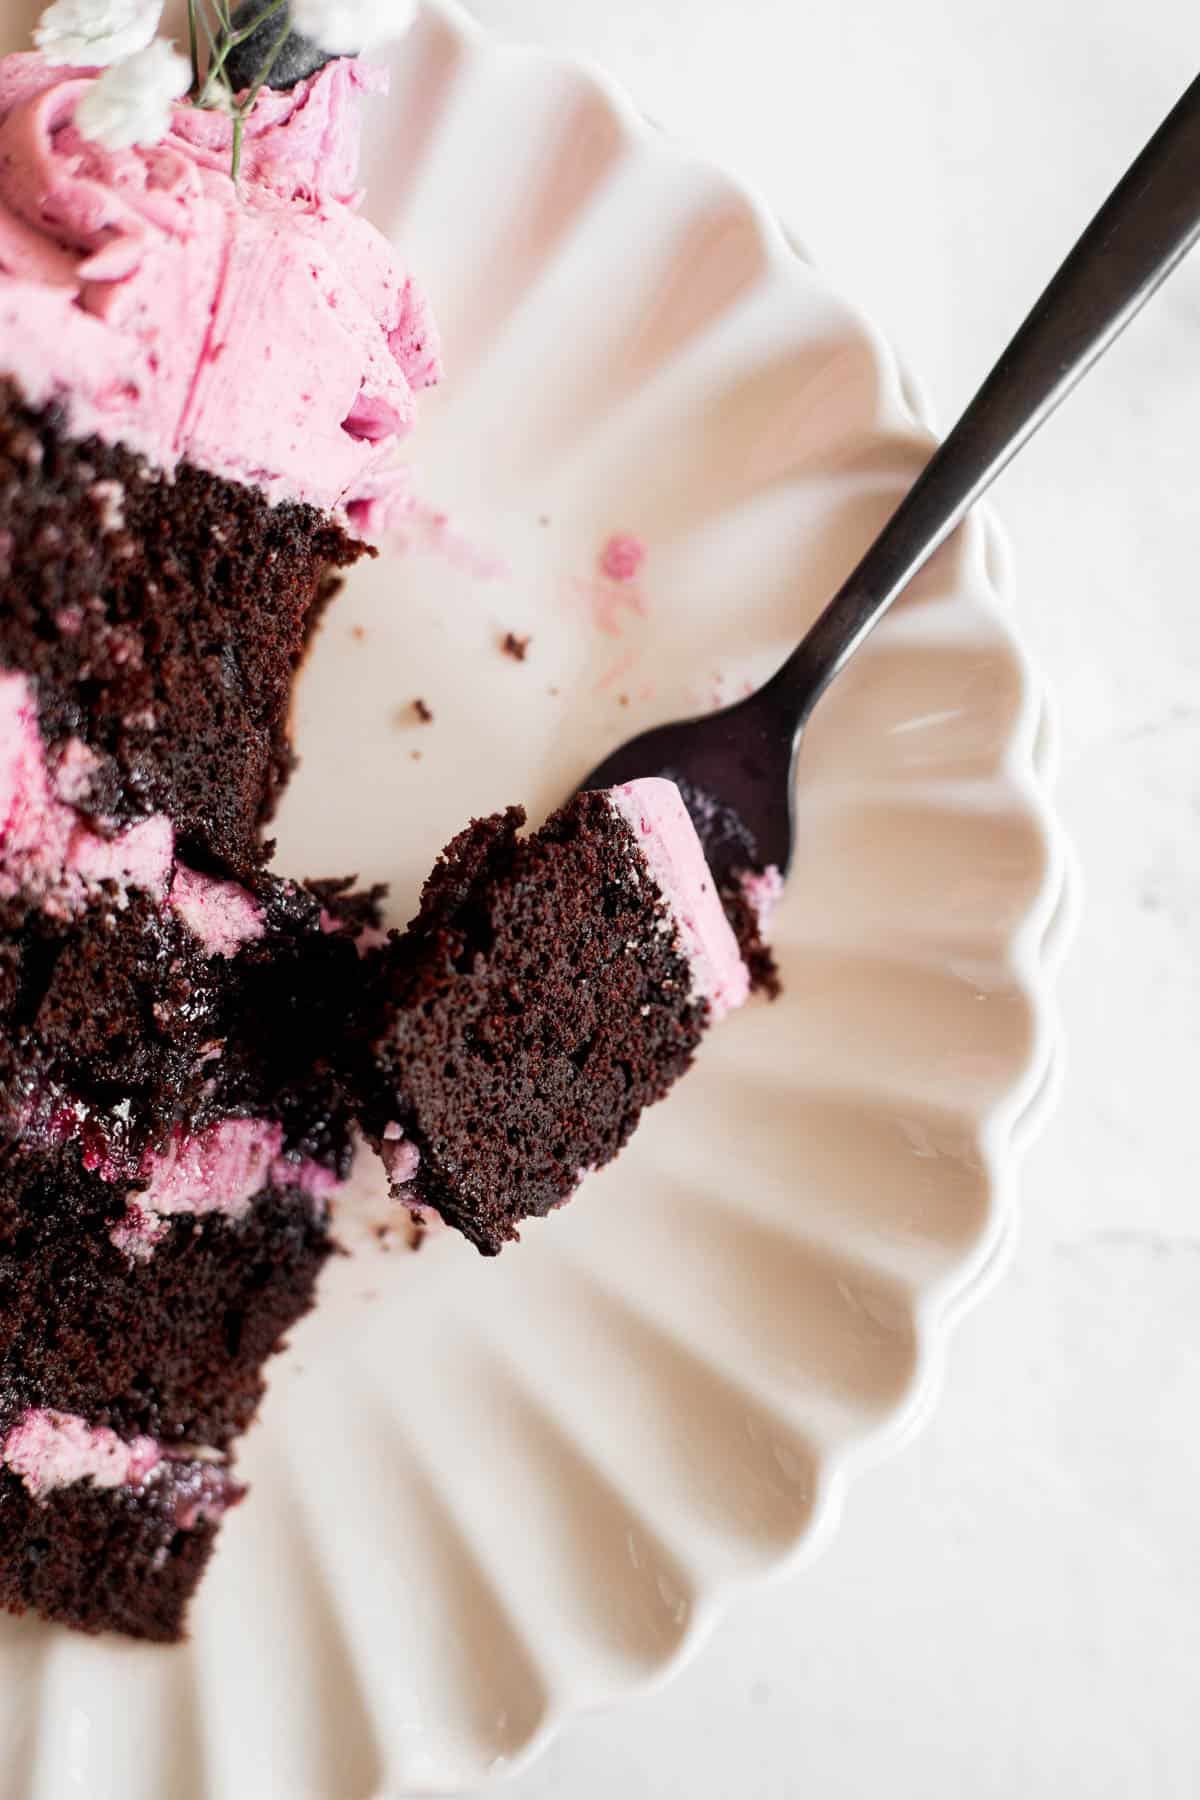 a slice of chocolate cake with blueberry filling and icing on a white plate.